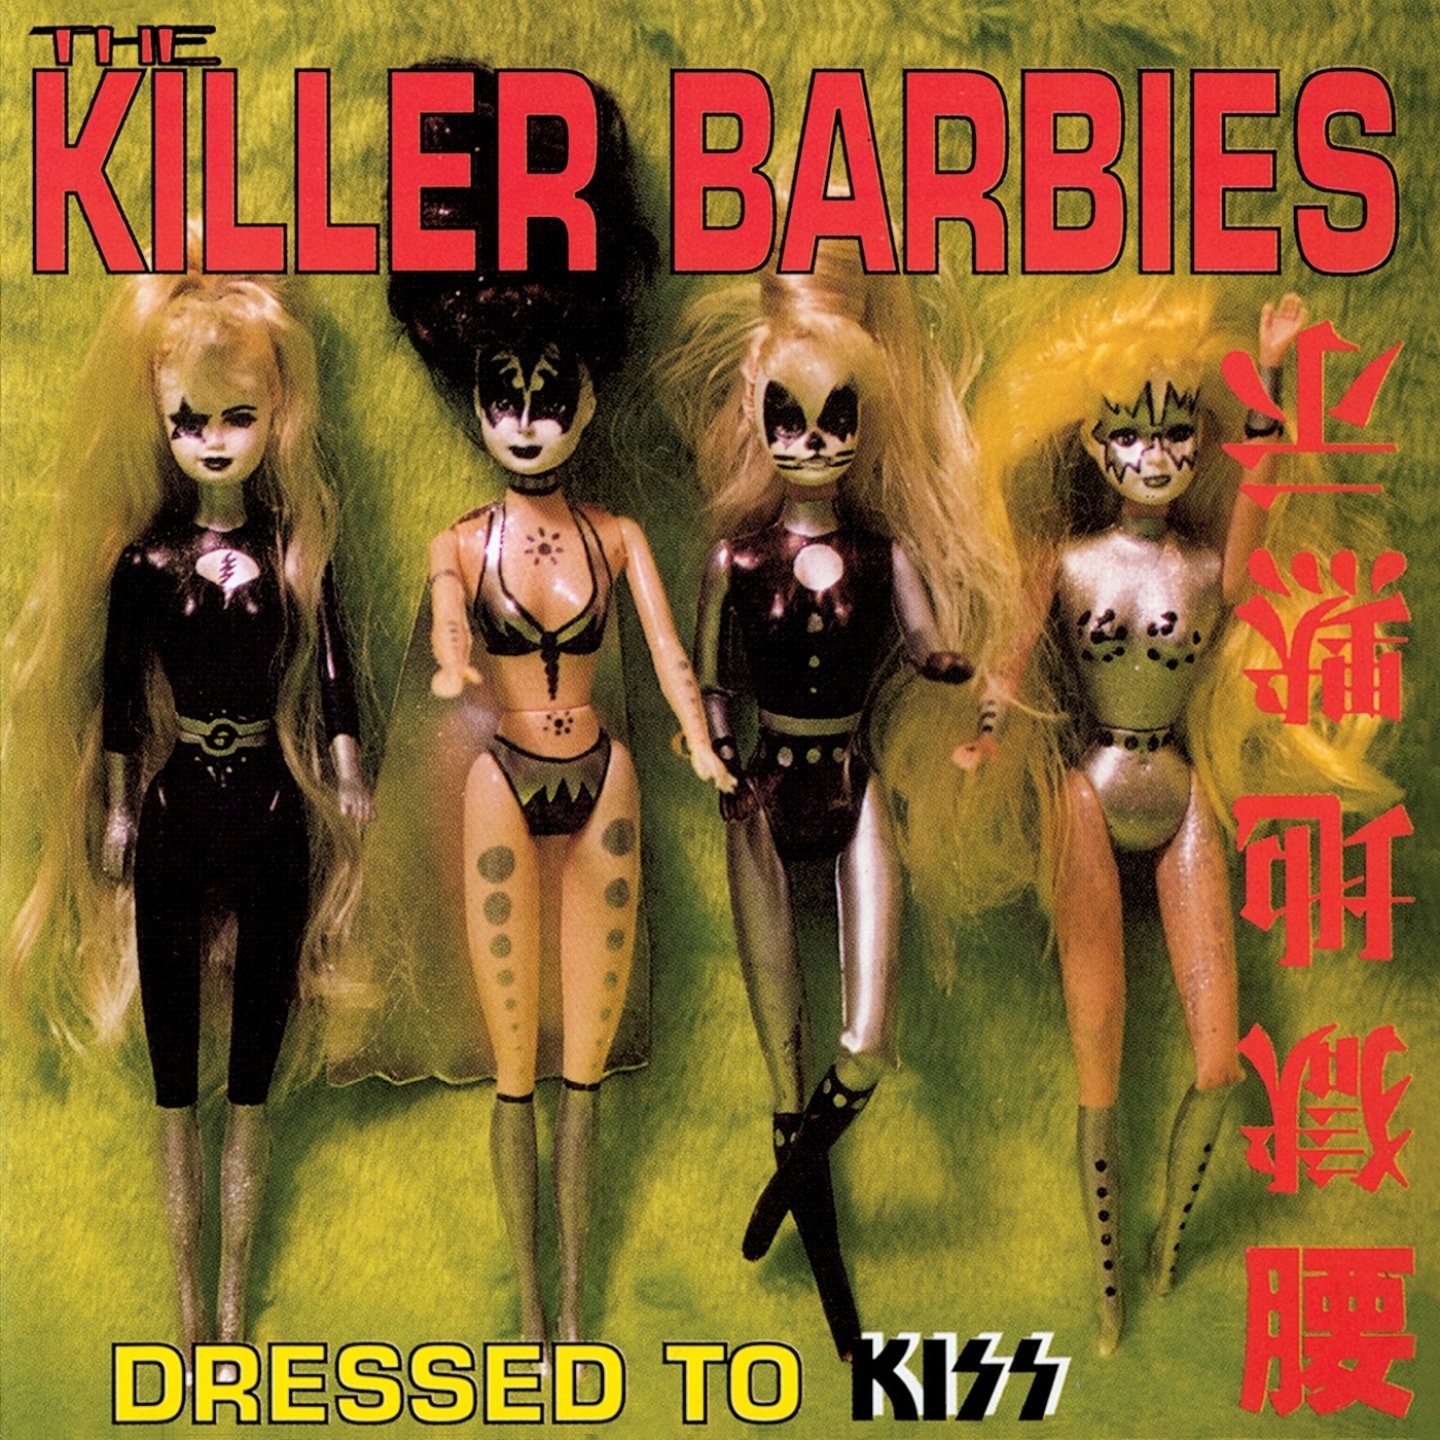 The Killer Barbies-Dressed To Kiss-CD-FLAC-1995-FiXIE